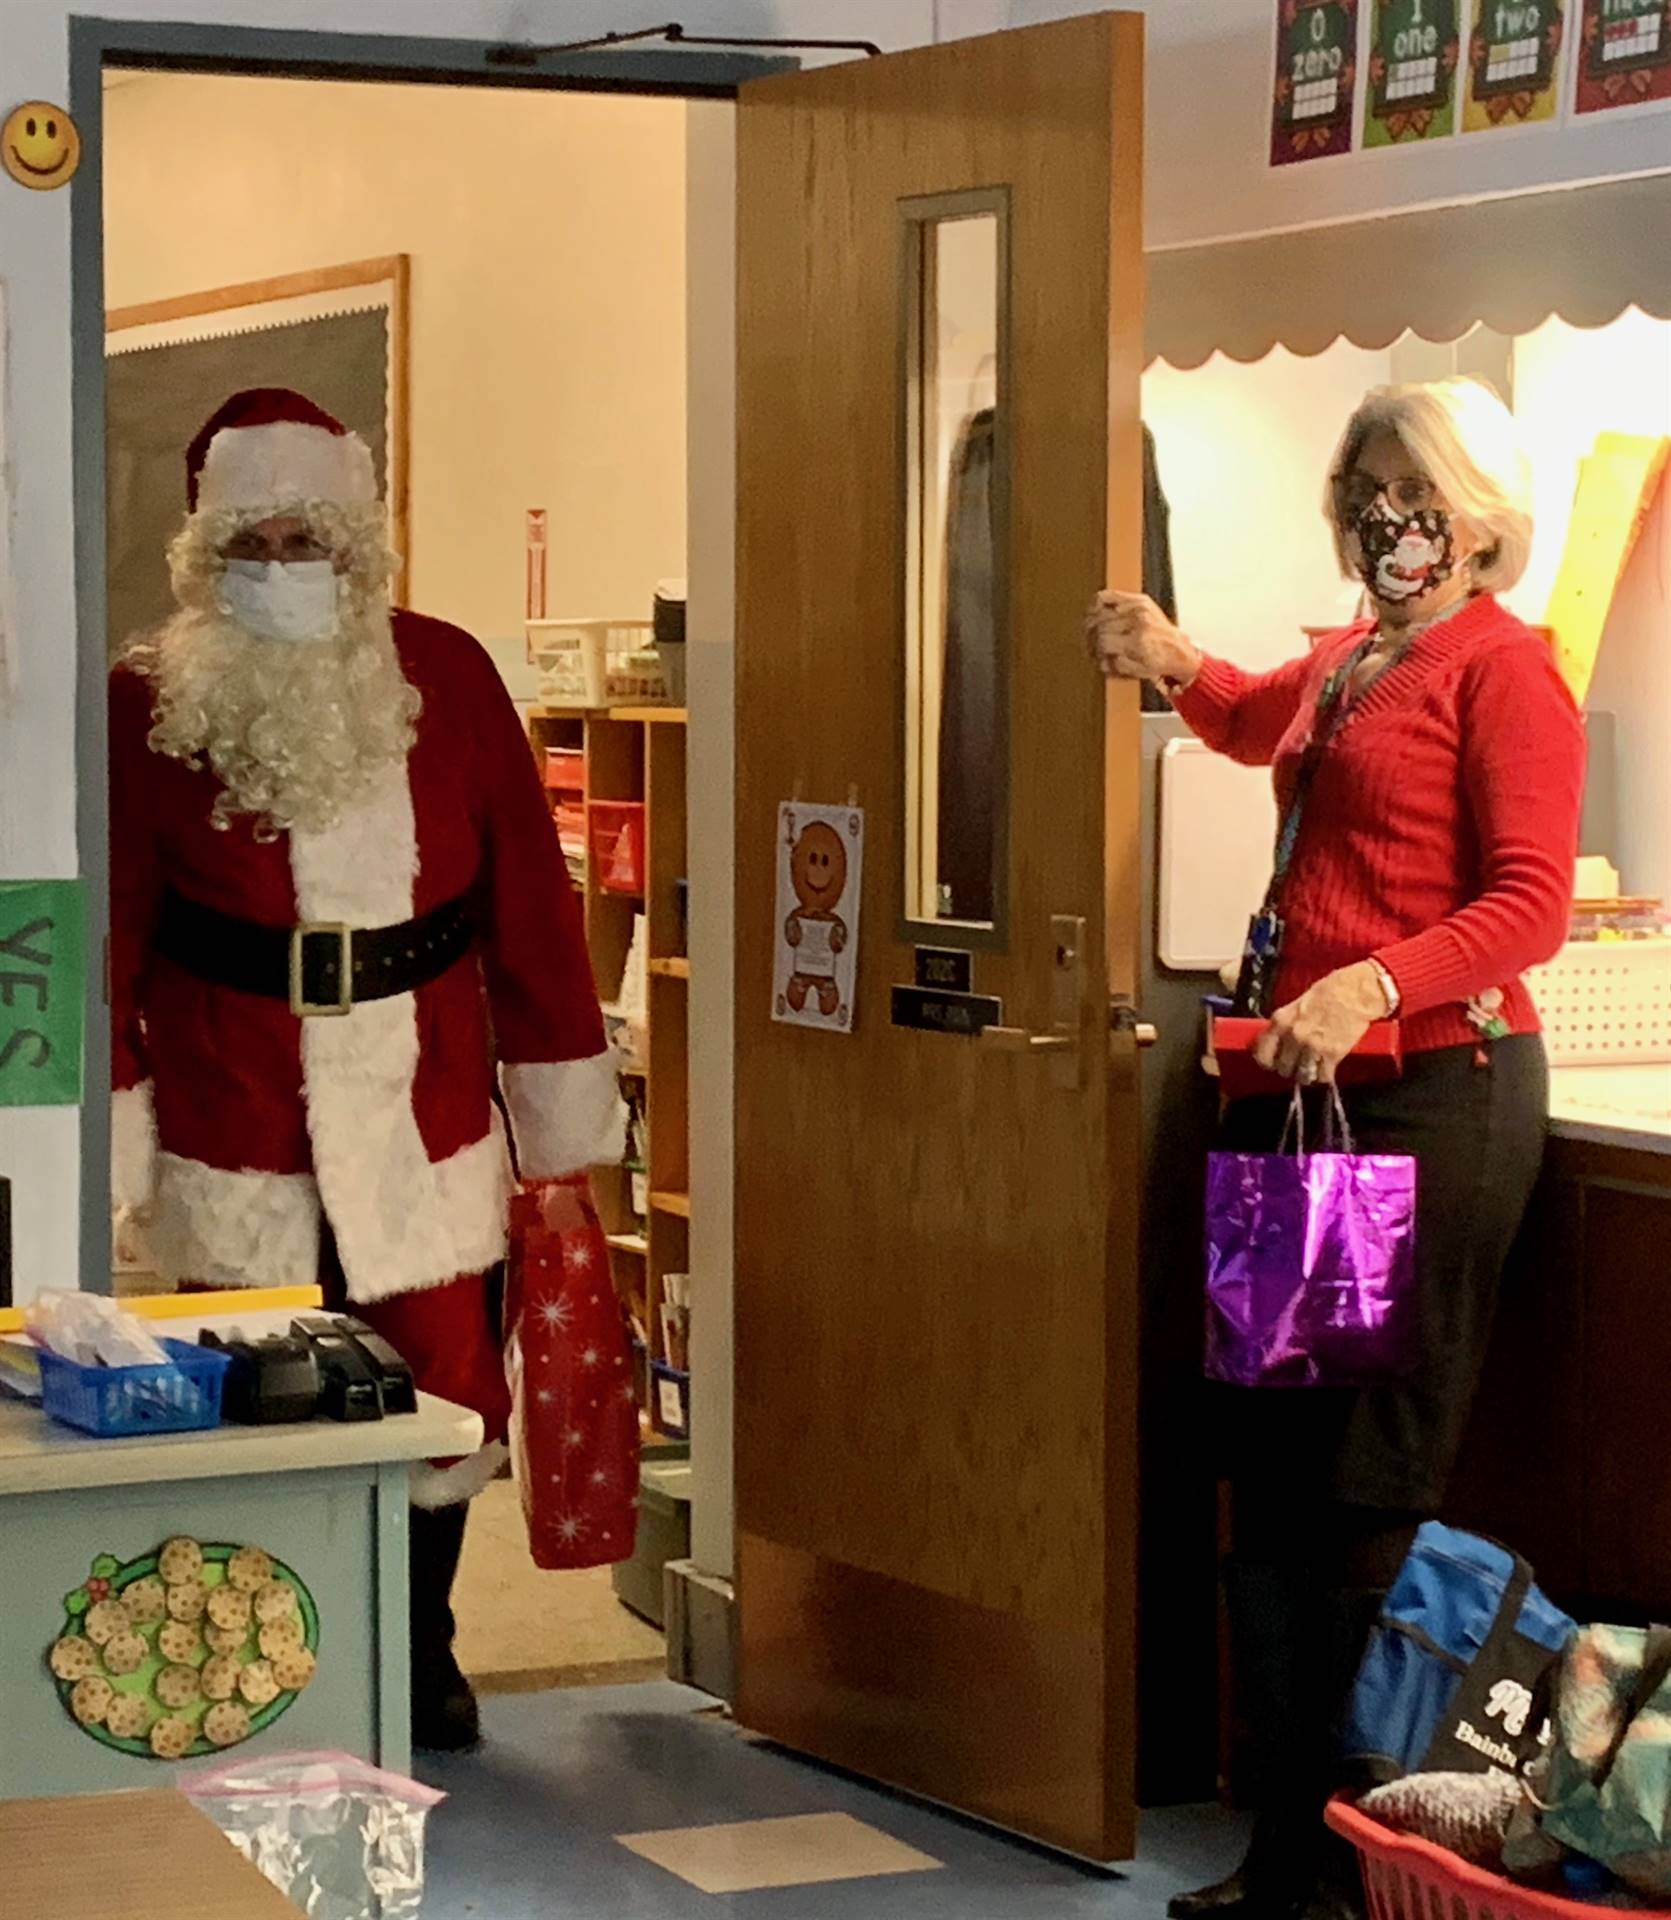 Santa and Mrs. Clause arrive through a classroom doorway!